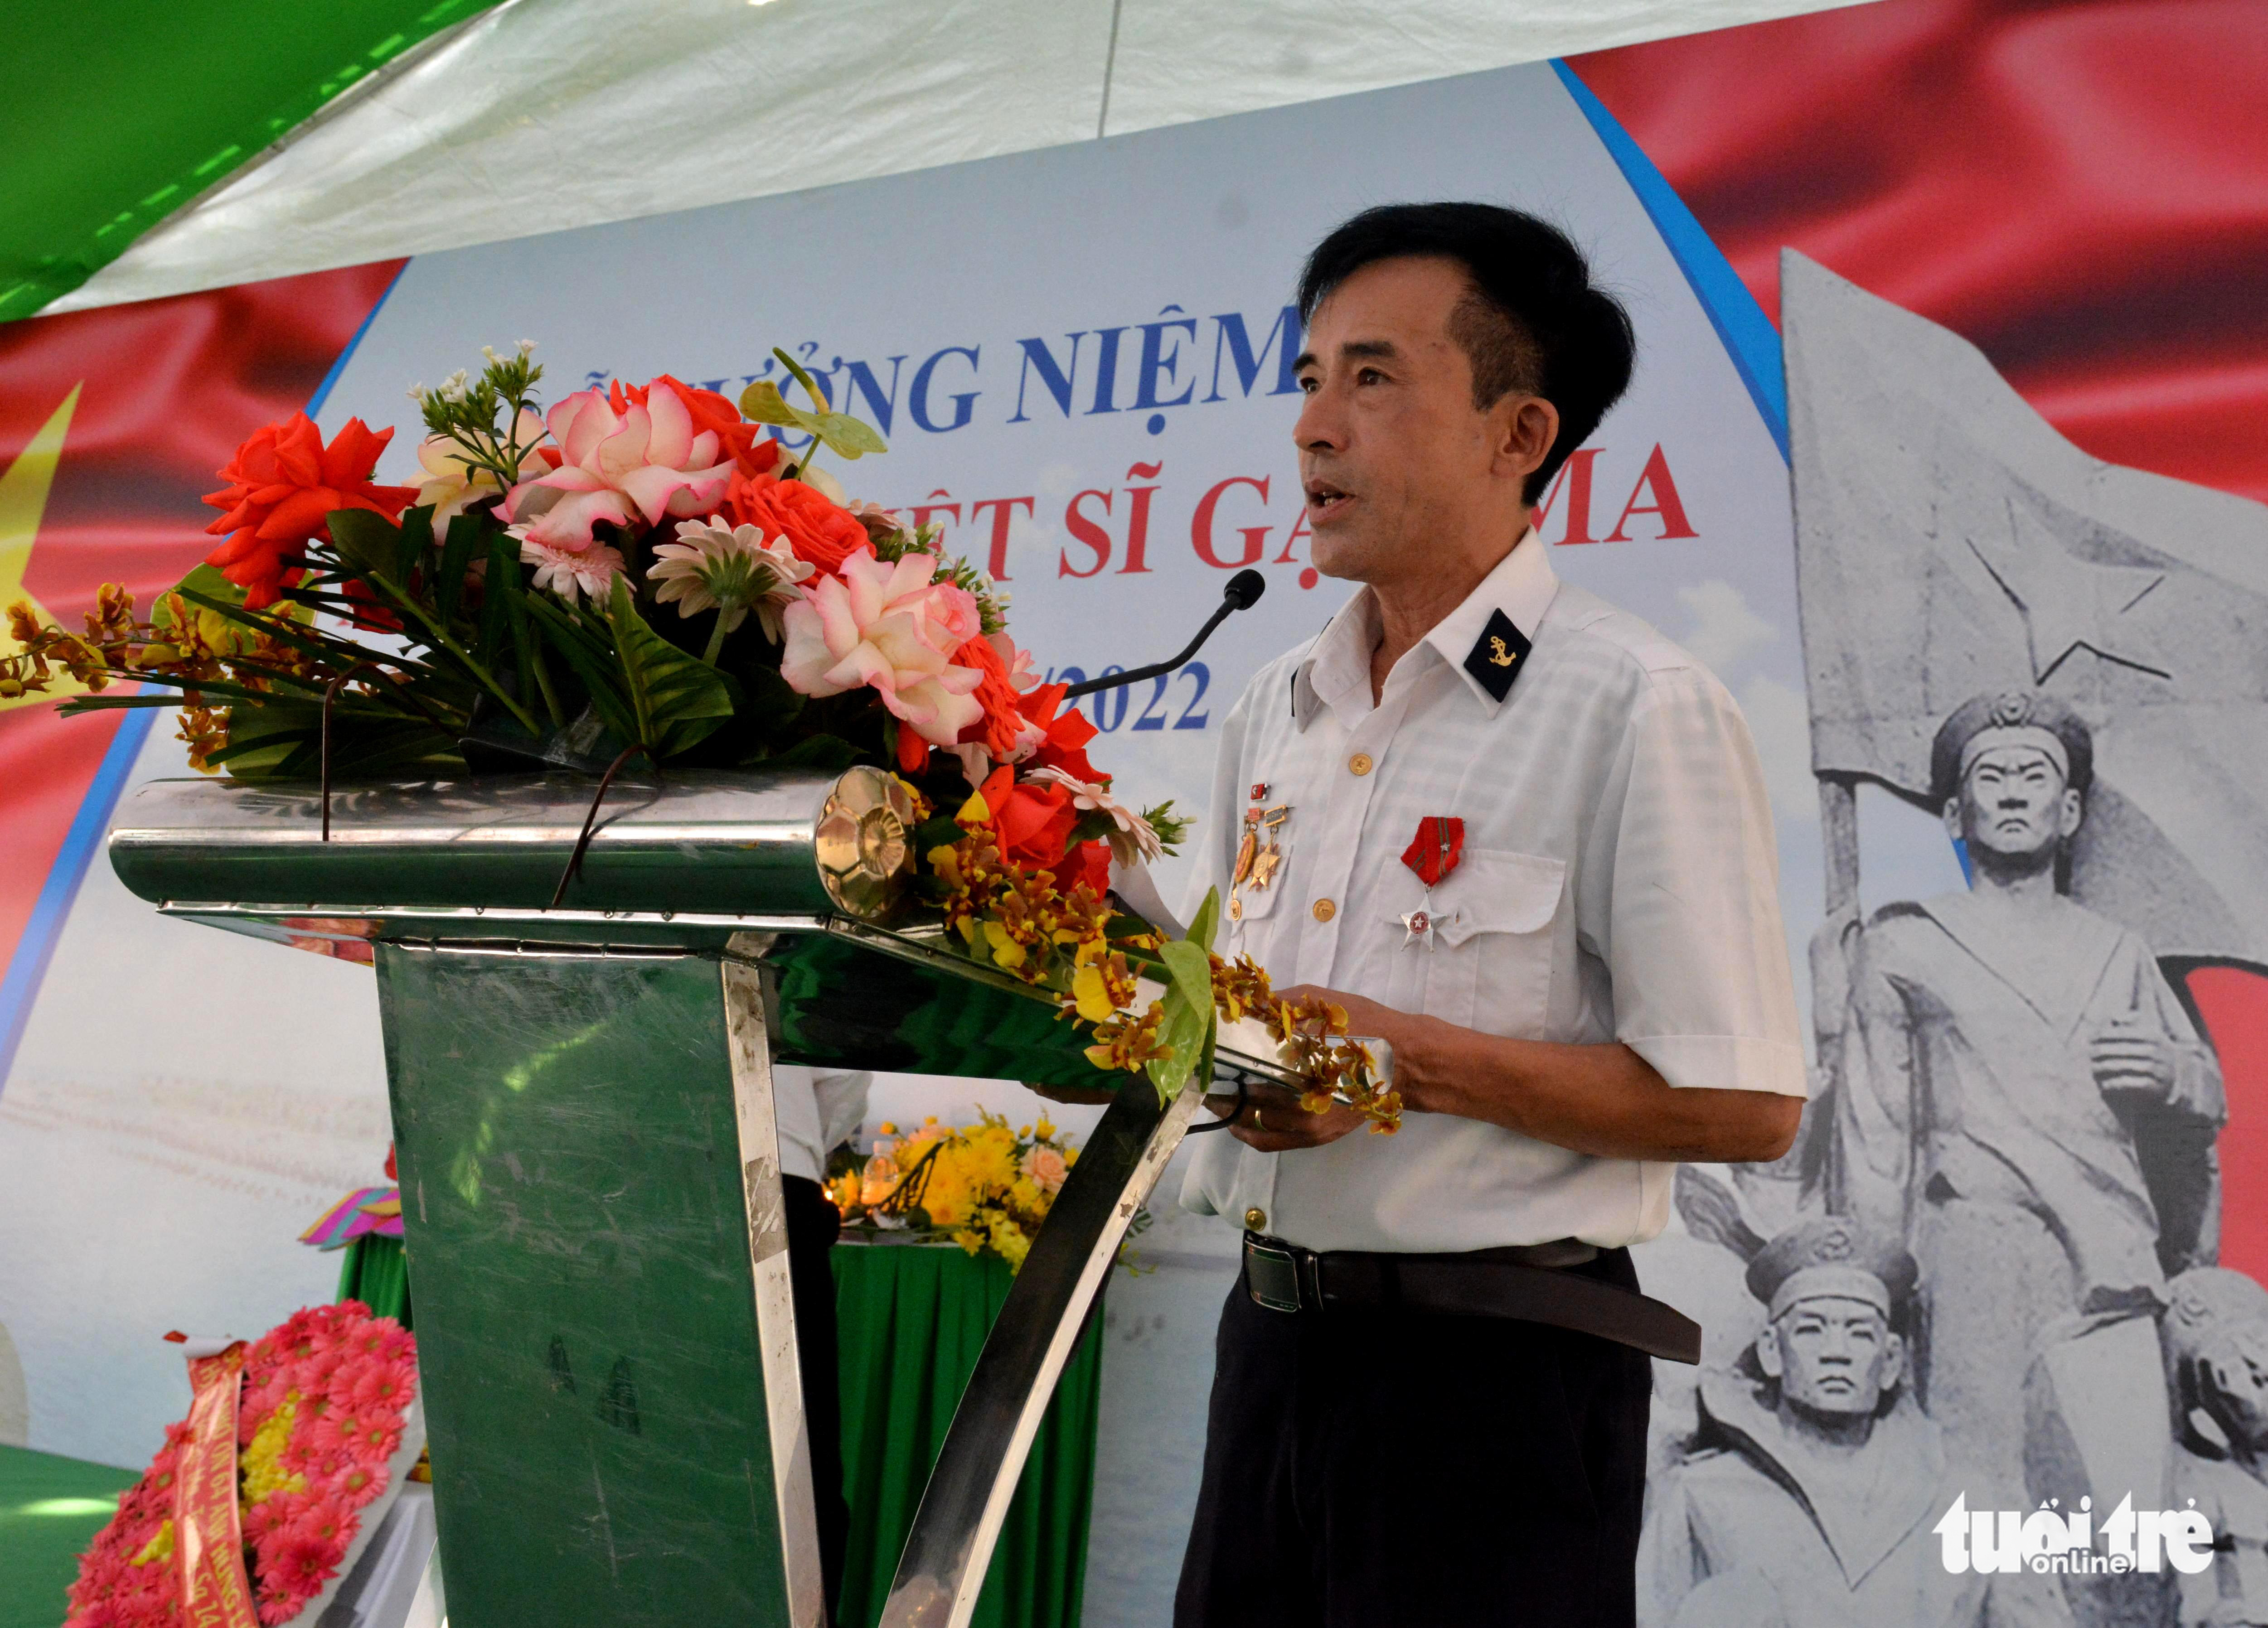 Le Huu Thao, a Gac Ma veteran, speaks at the ceremony to commemorate the fallen soldiers in Ha Tinh Province, March 14, 2022. Photo: Le Minh / Tuoi Tre